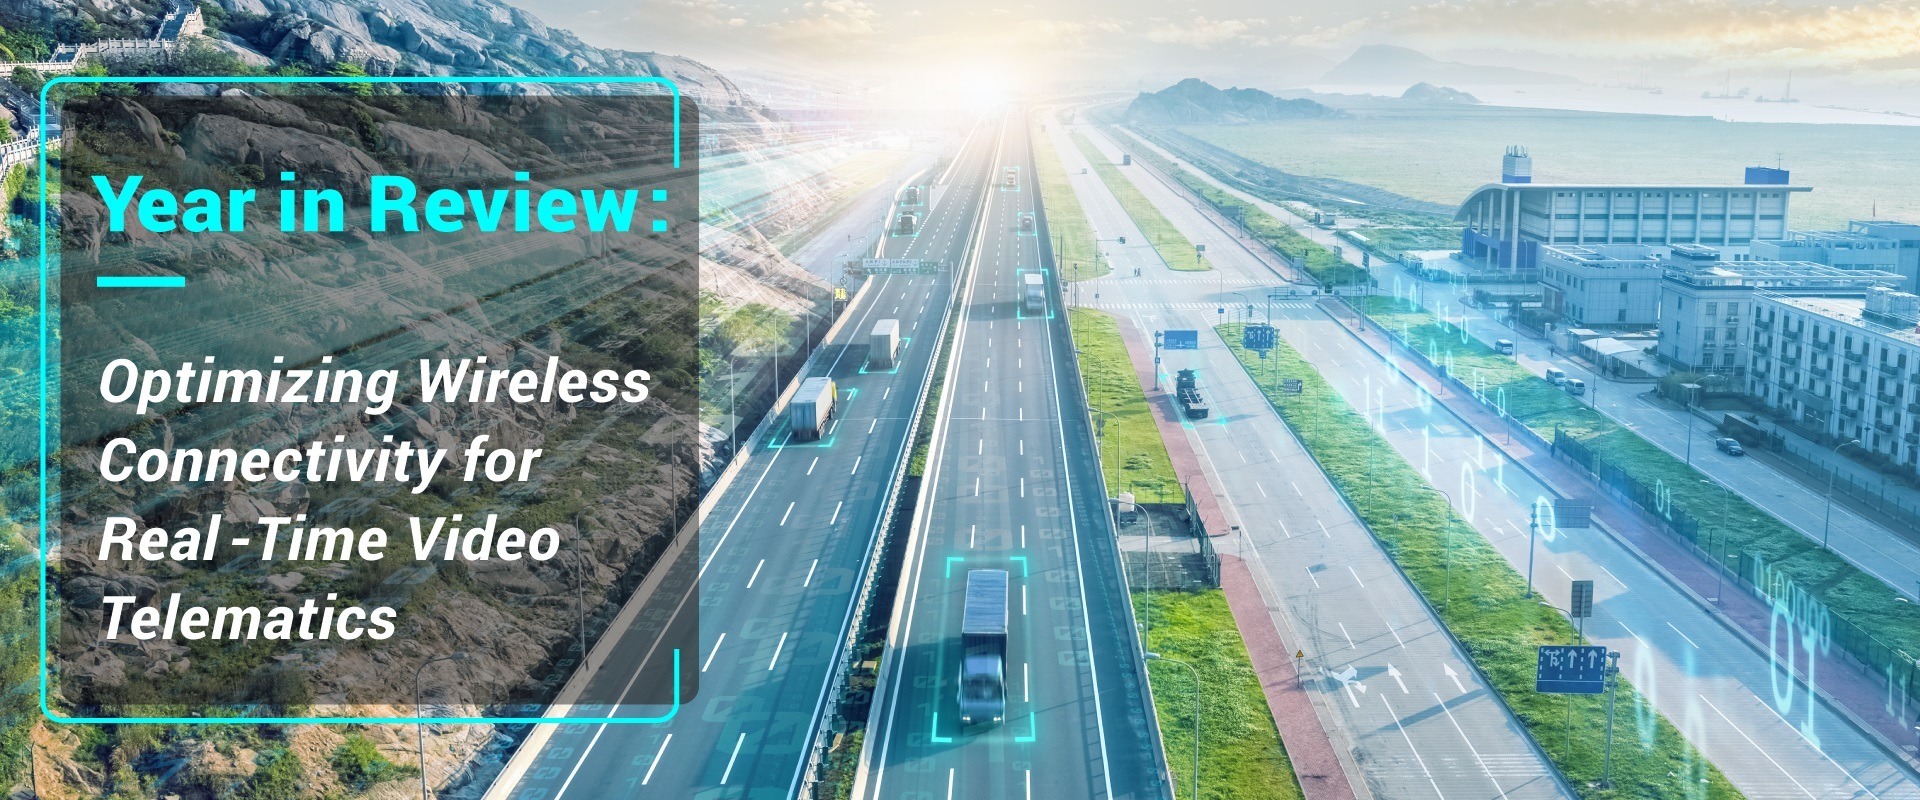 Year in Review: Optimizing Wireless Connectivity for Real-Time Video Telematics